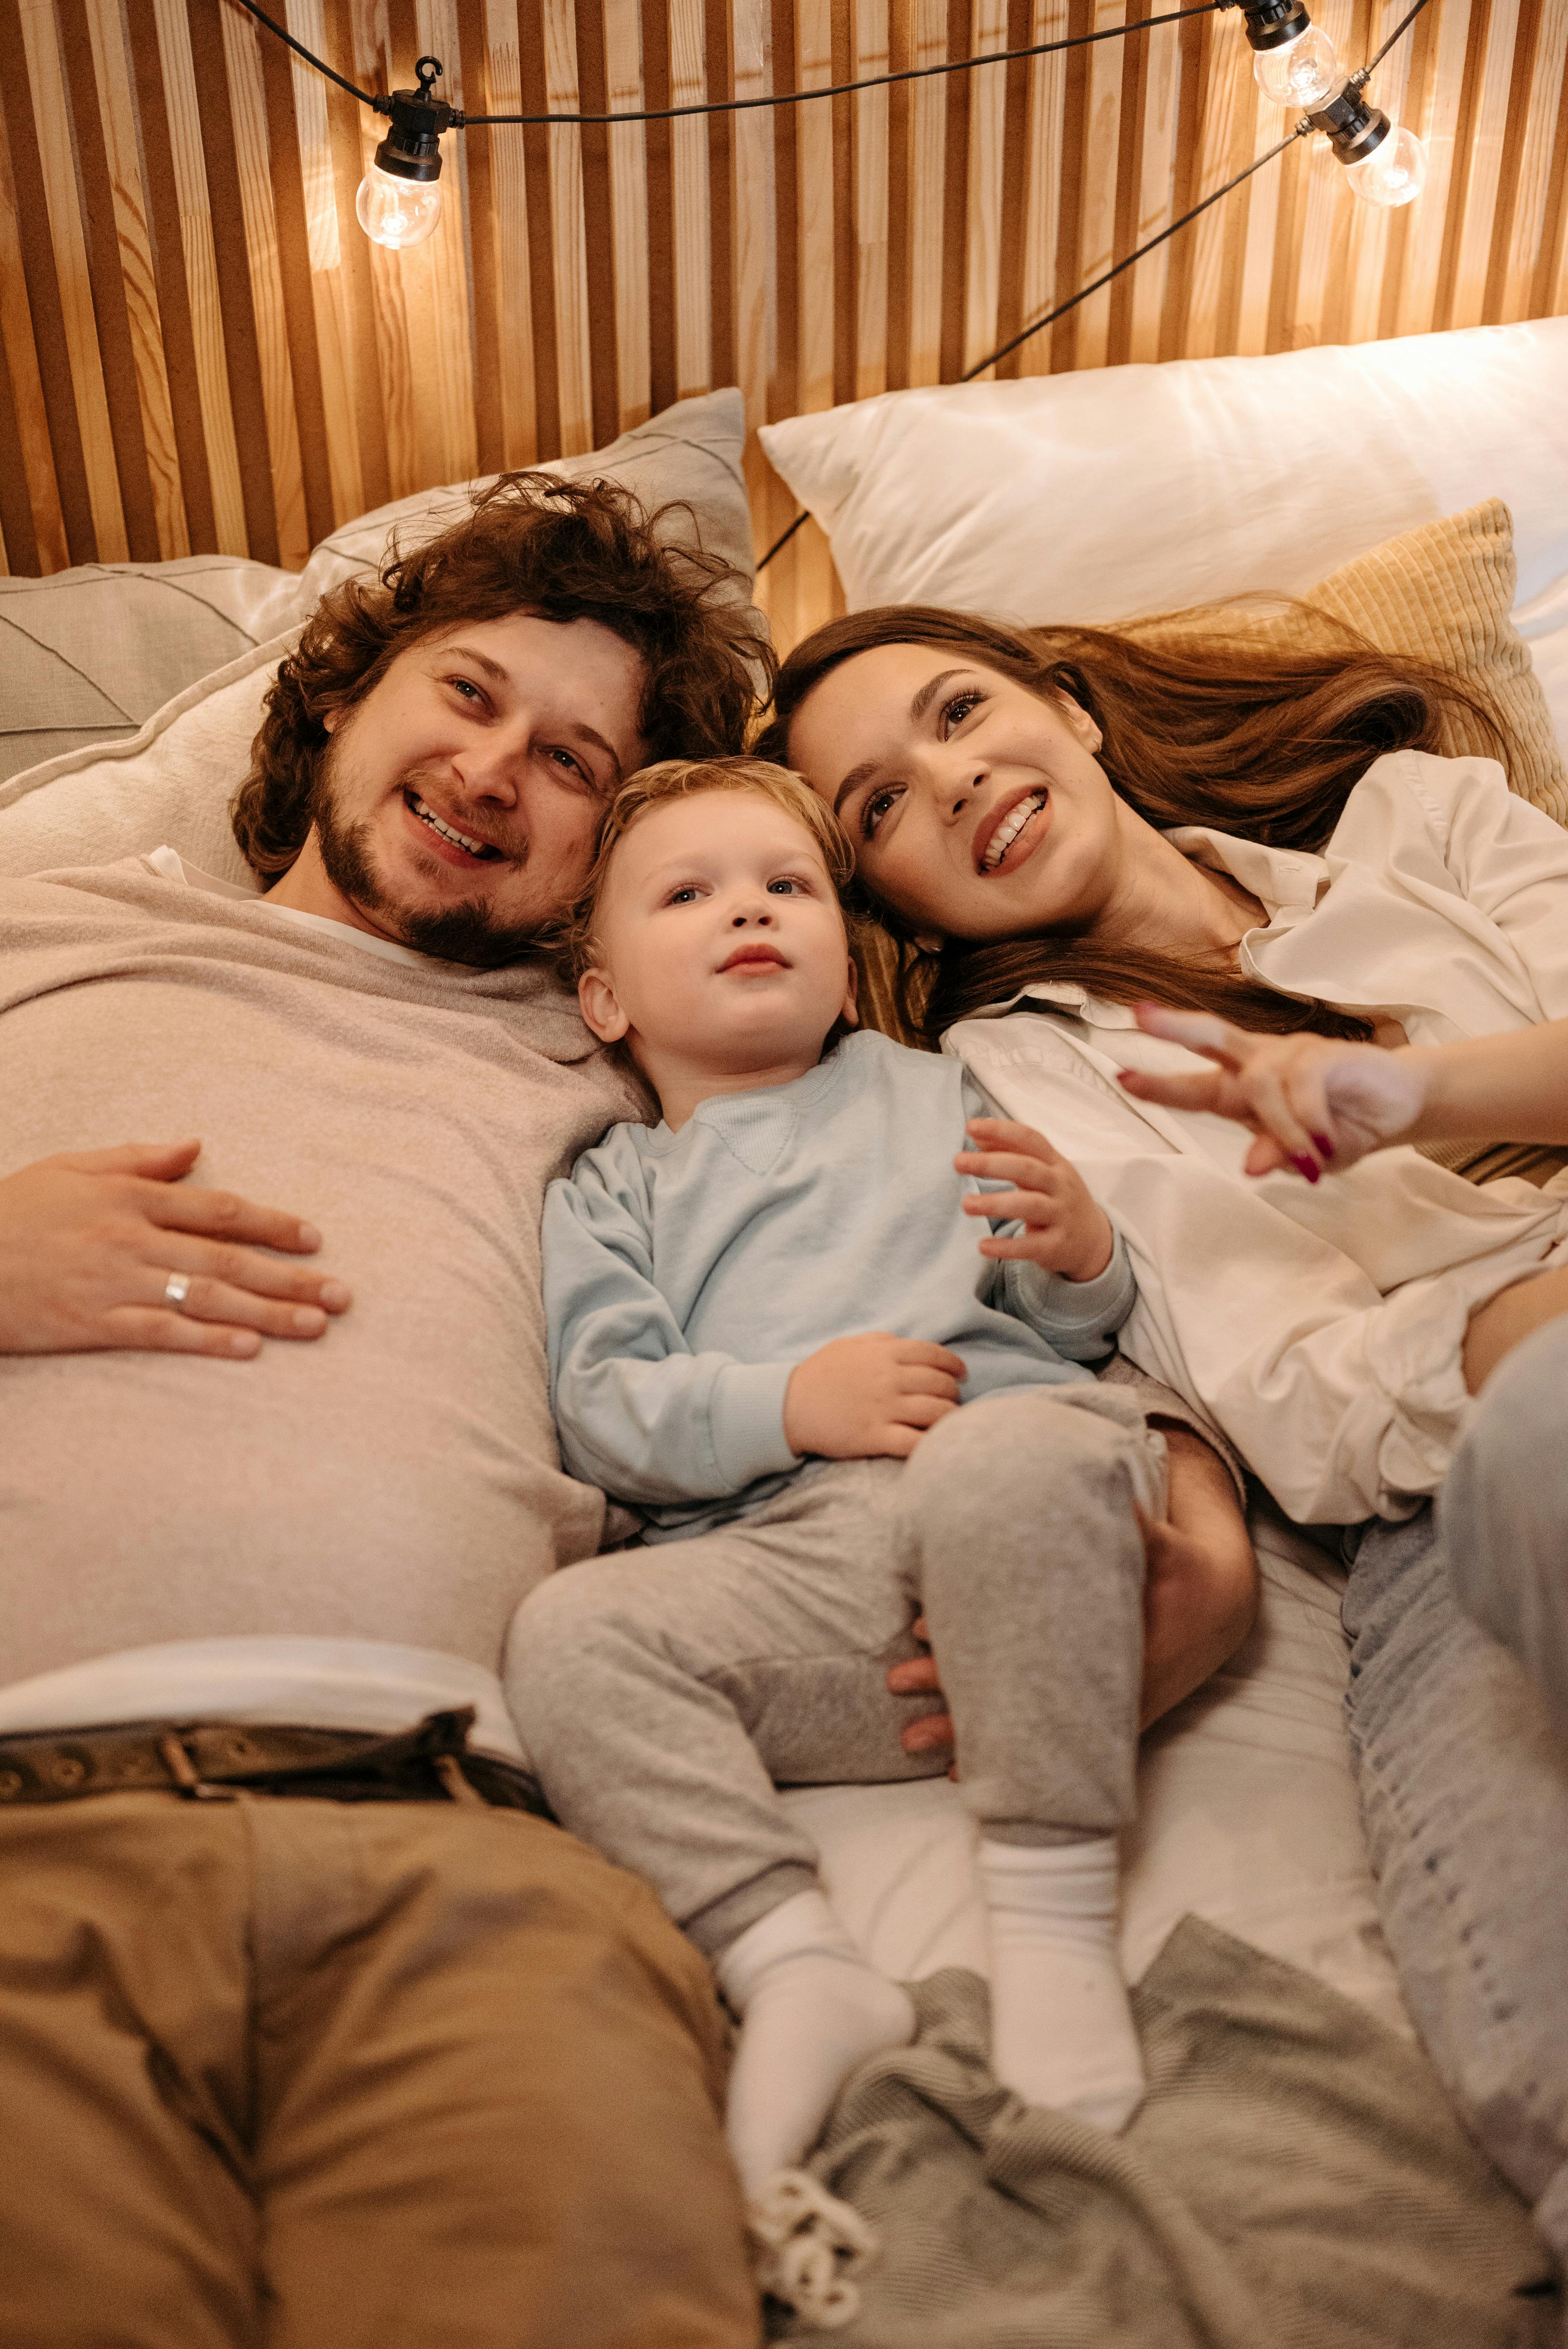 A couple bonding with their son | Source: Pexels